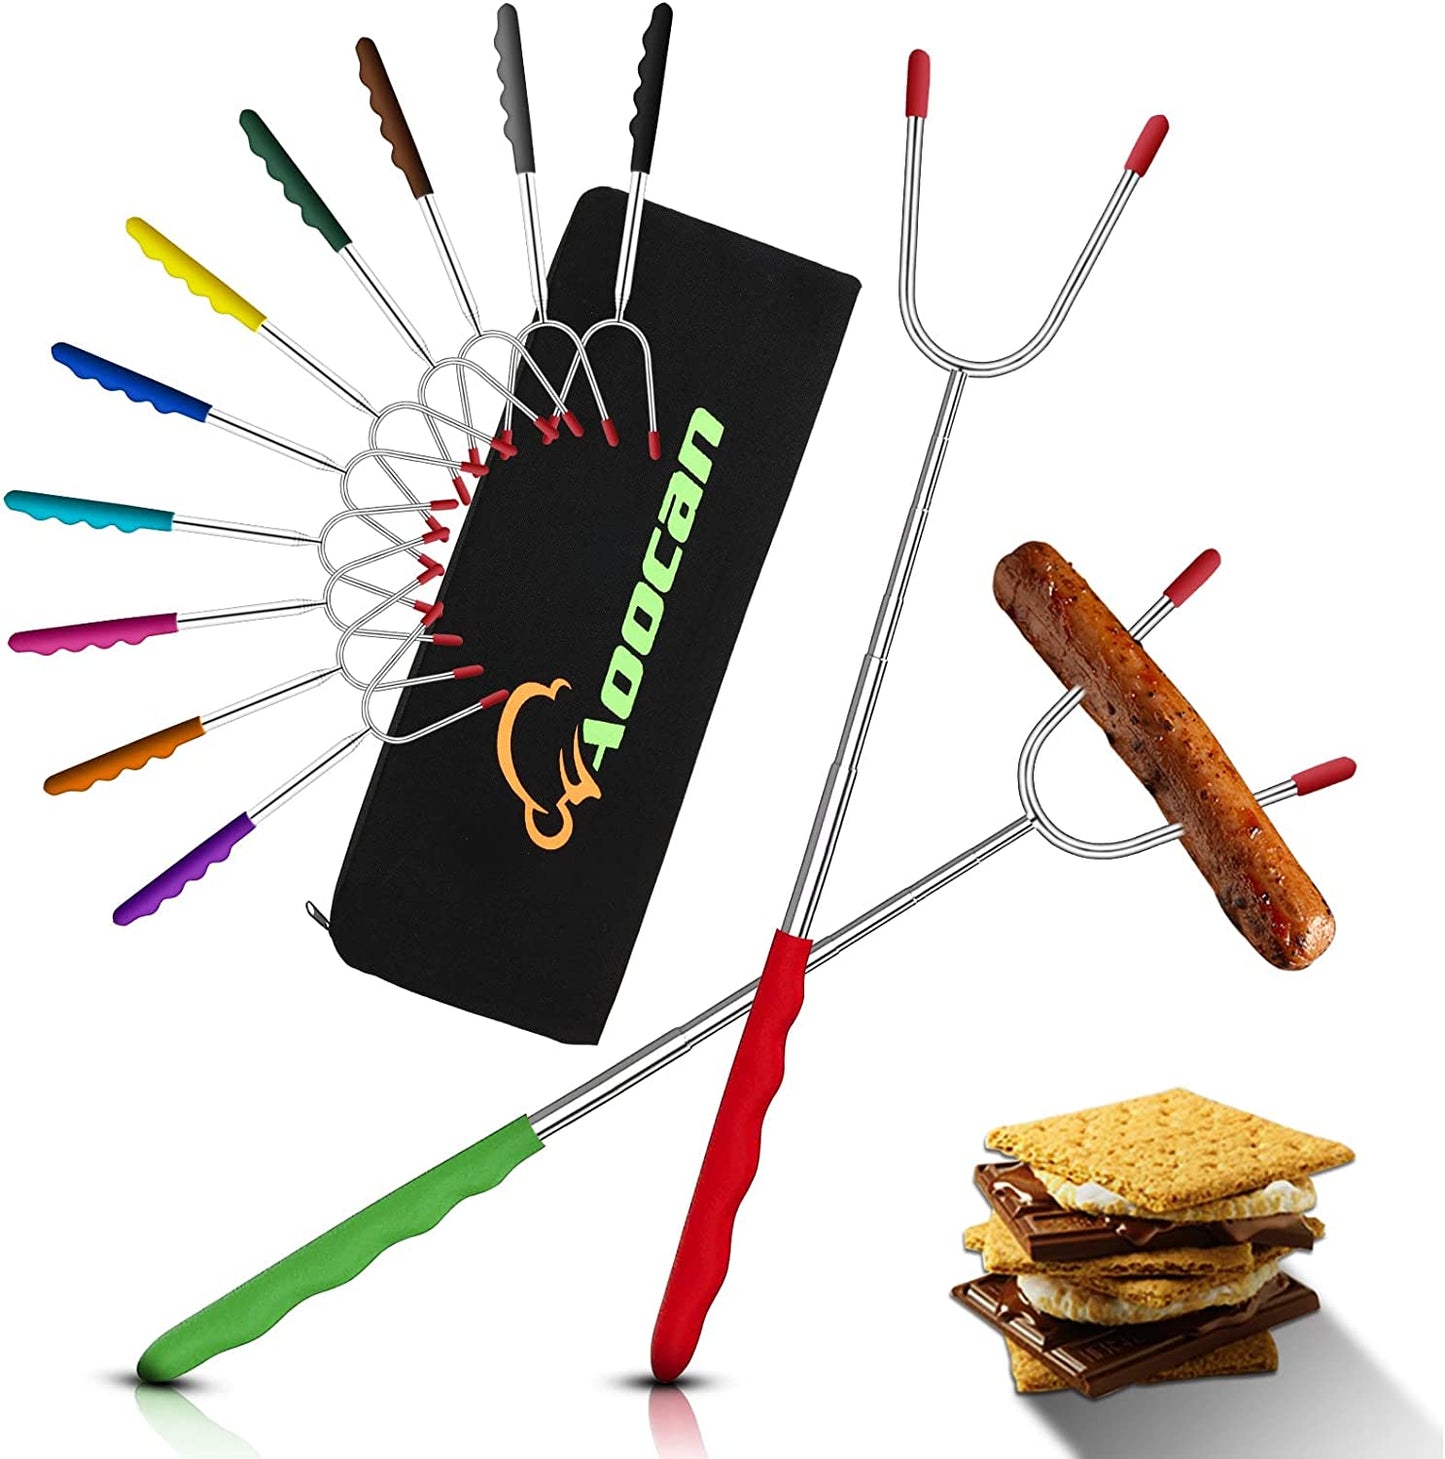 Easy to Store Marshmallow Roasting Sticks(12 Pack) Extra Long, 45 Inch Smores Sticks for Fire Pit, Telescoping Rotating Smores Skewers - Hot Dog Roasting Sticks for Campfire, Camping, Bonfire and Grill